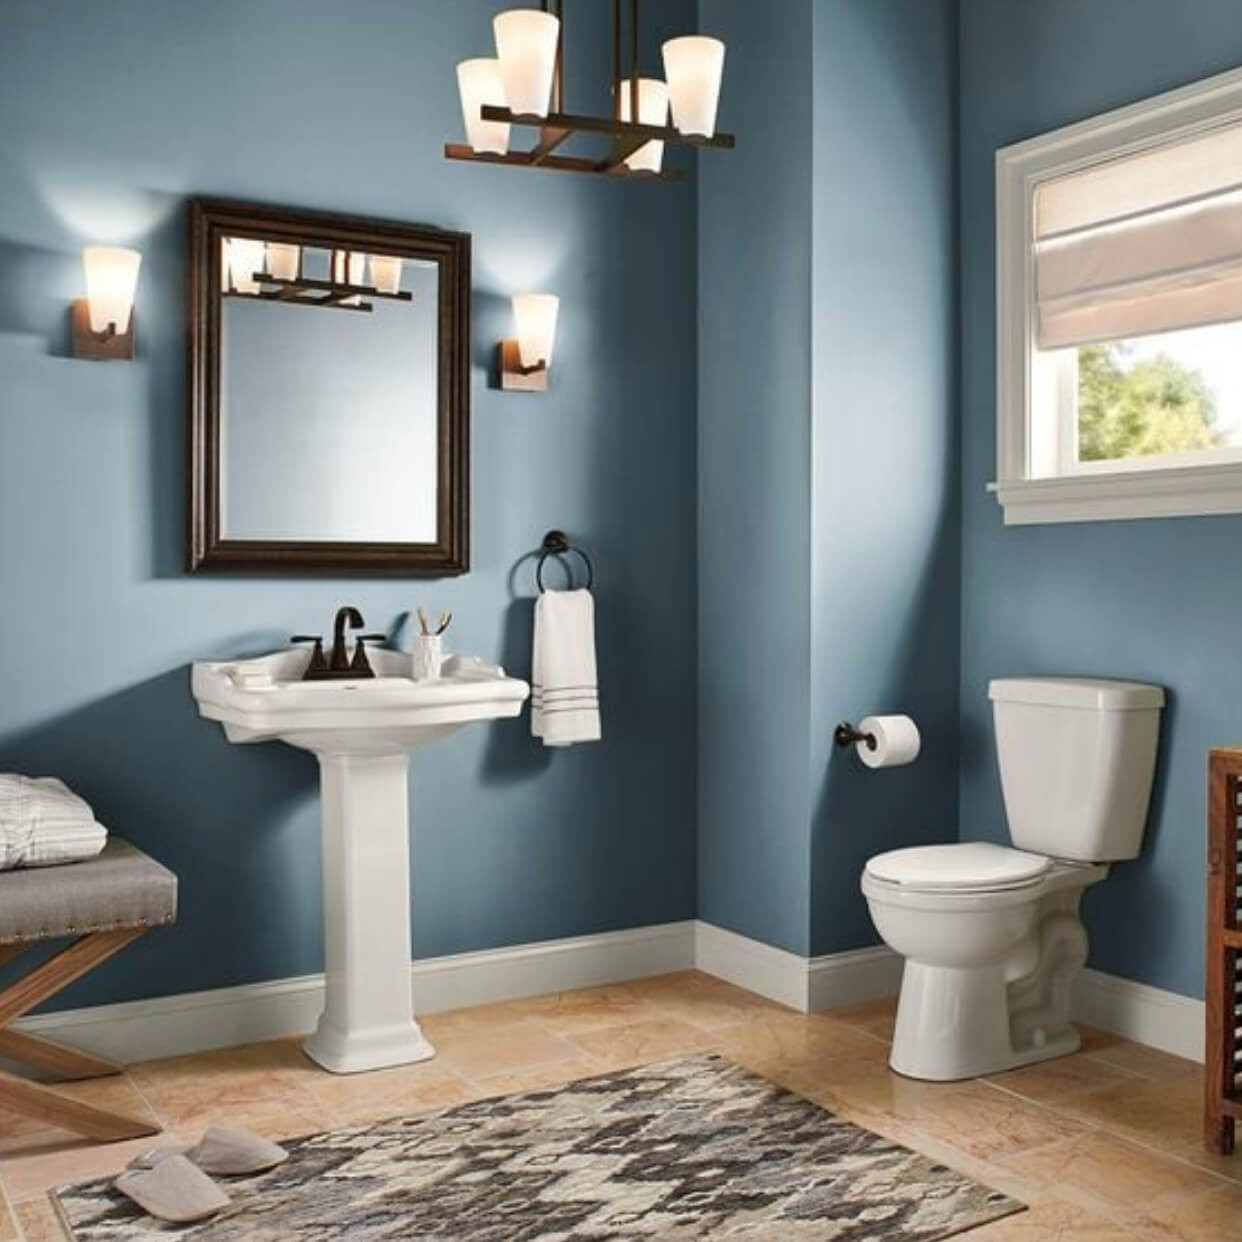 Bathroom Paint Colors Behr
 Decorating Ideas for Behr Blueprint 2019 Color of the